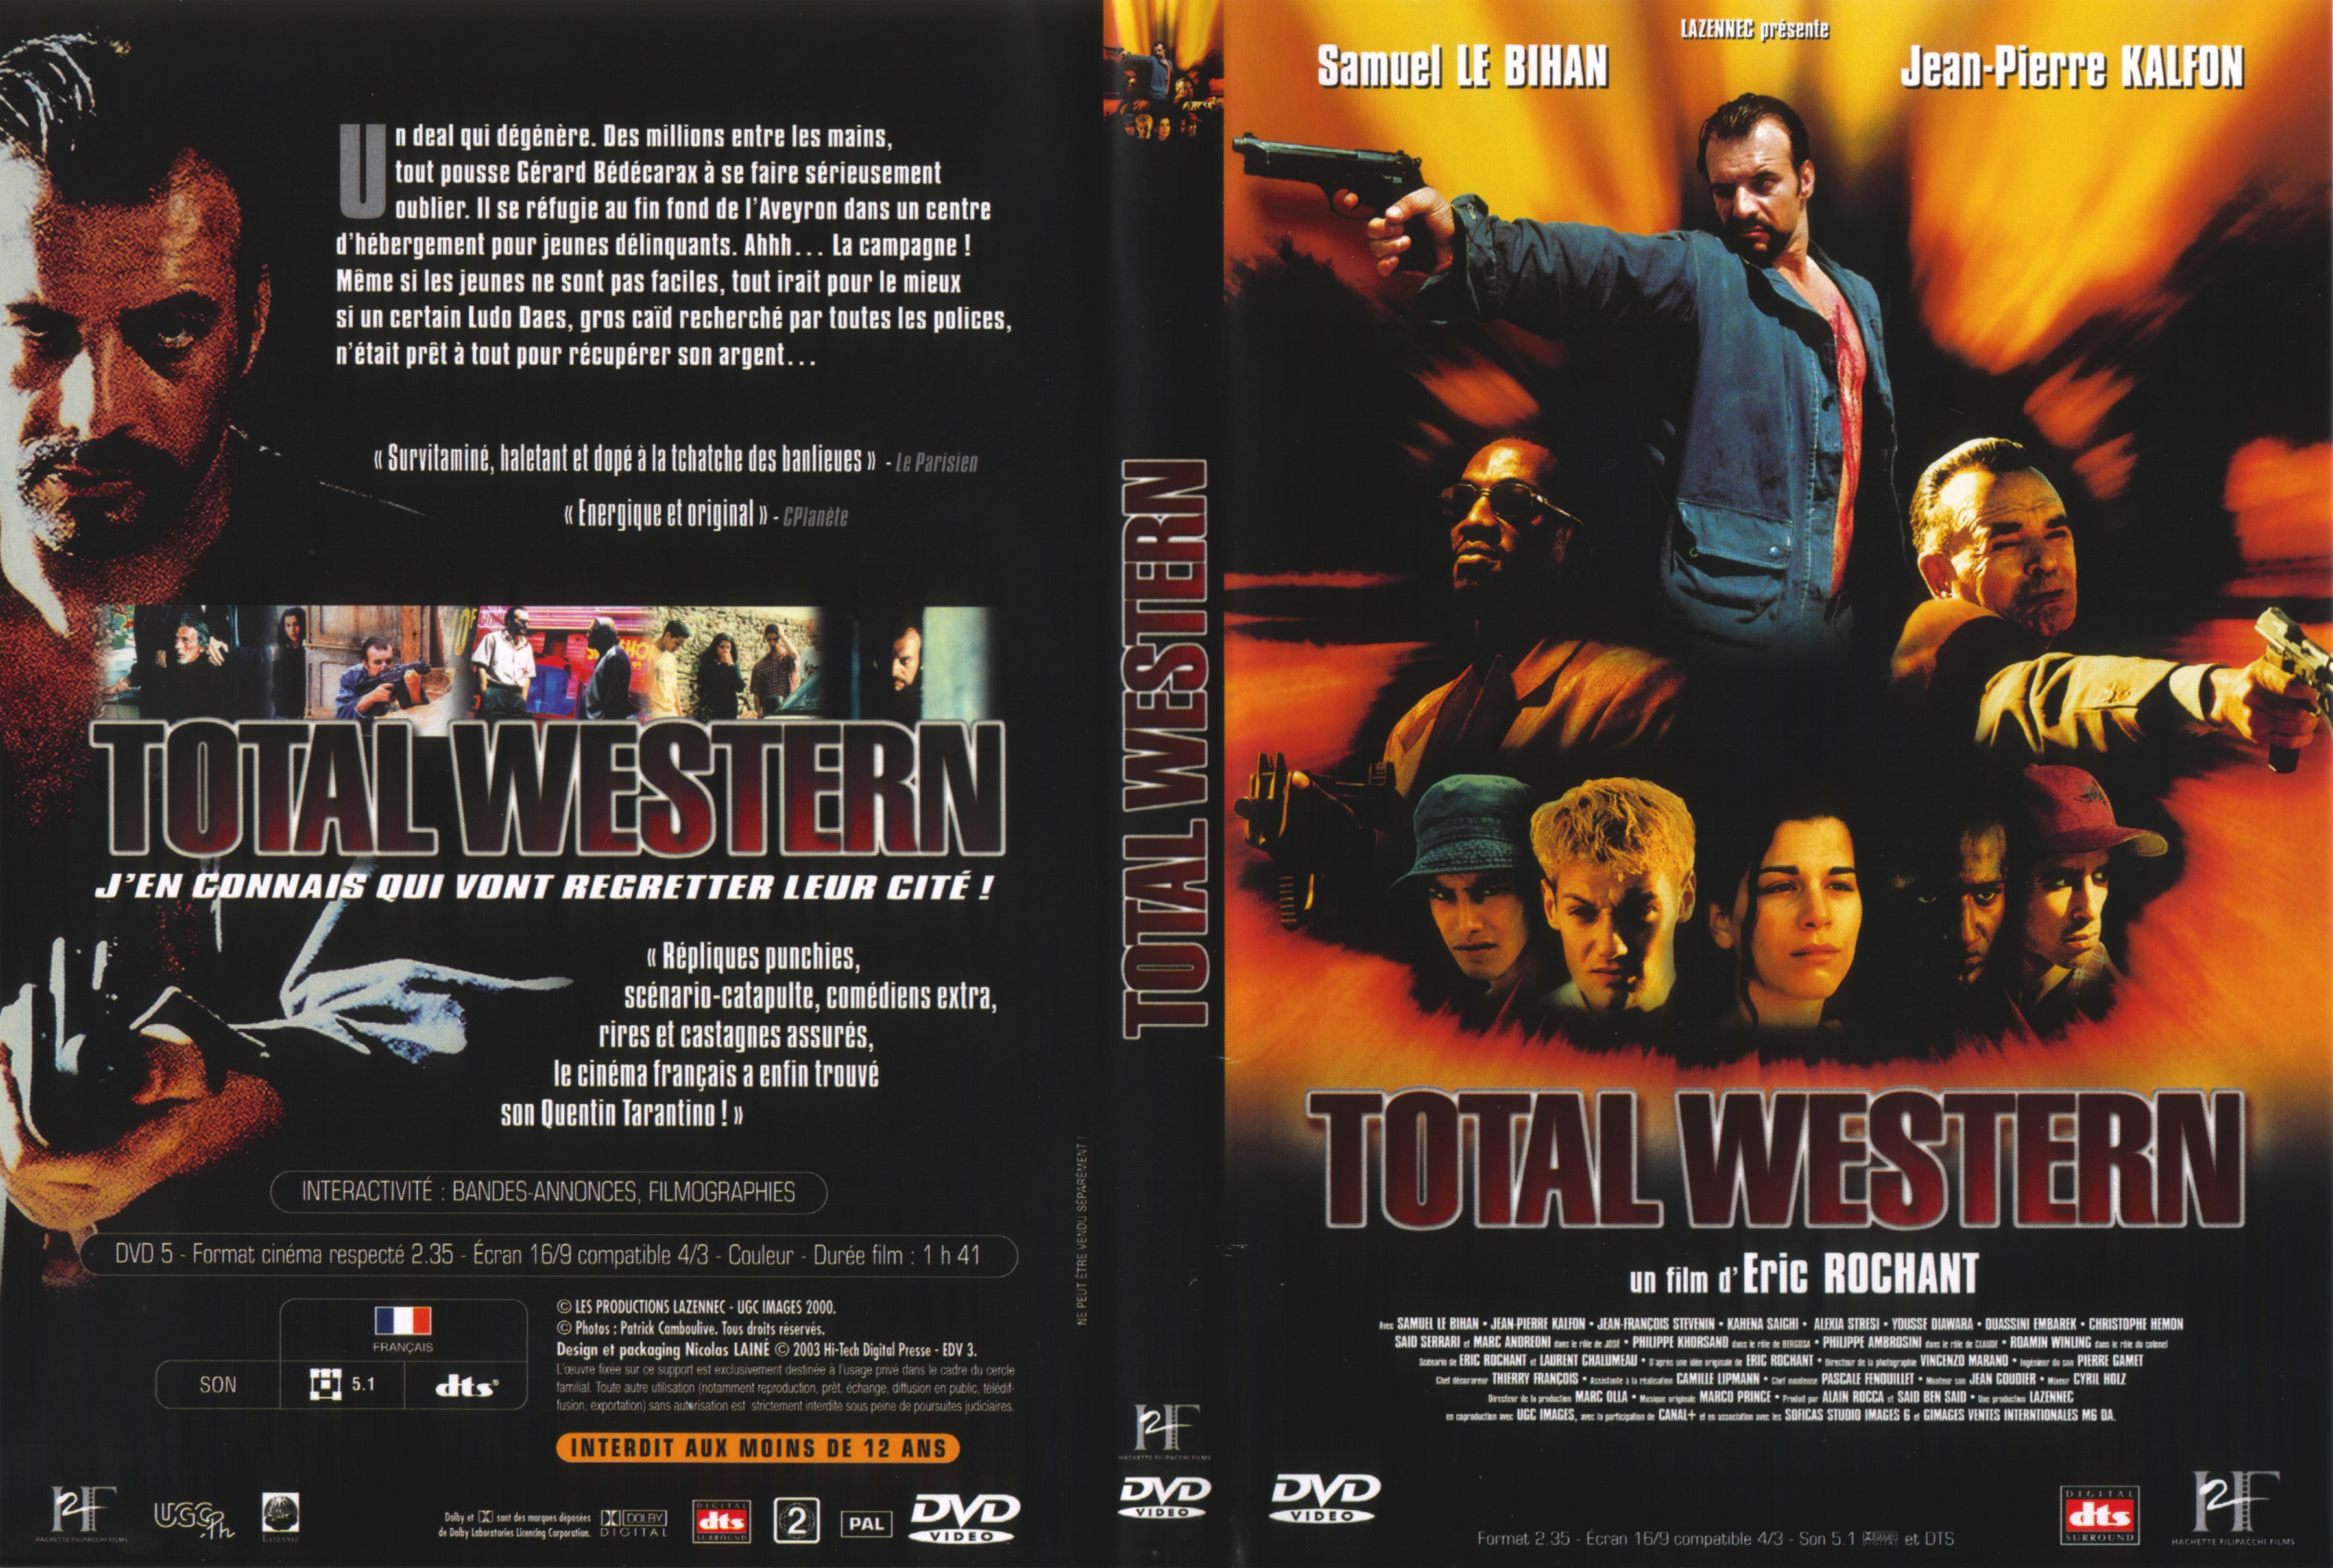 Jaquette DVD Total western